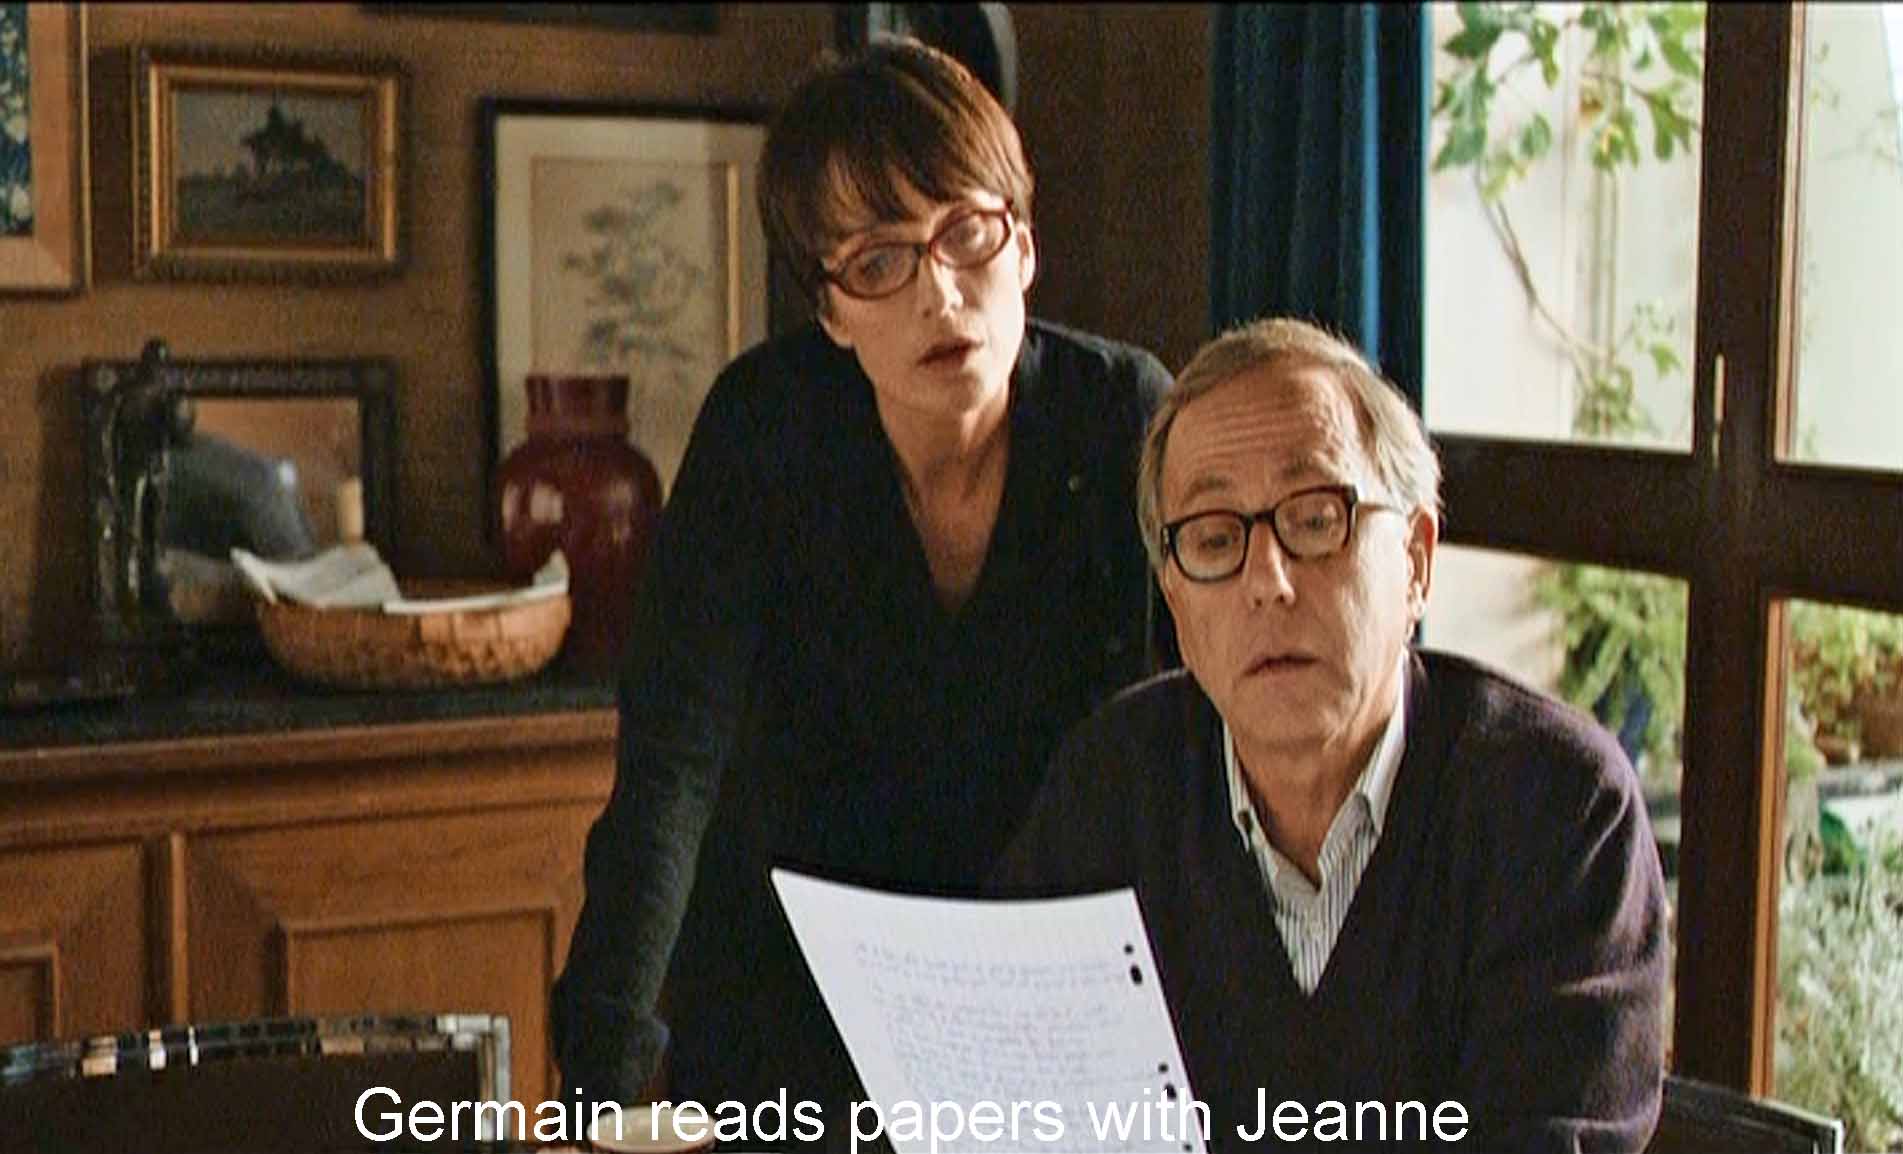 Germain reads papers with Jeanne